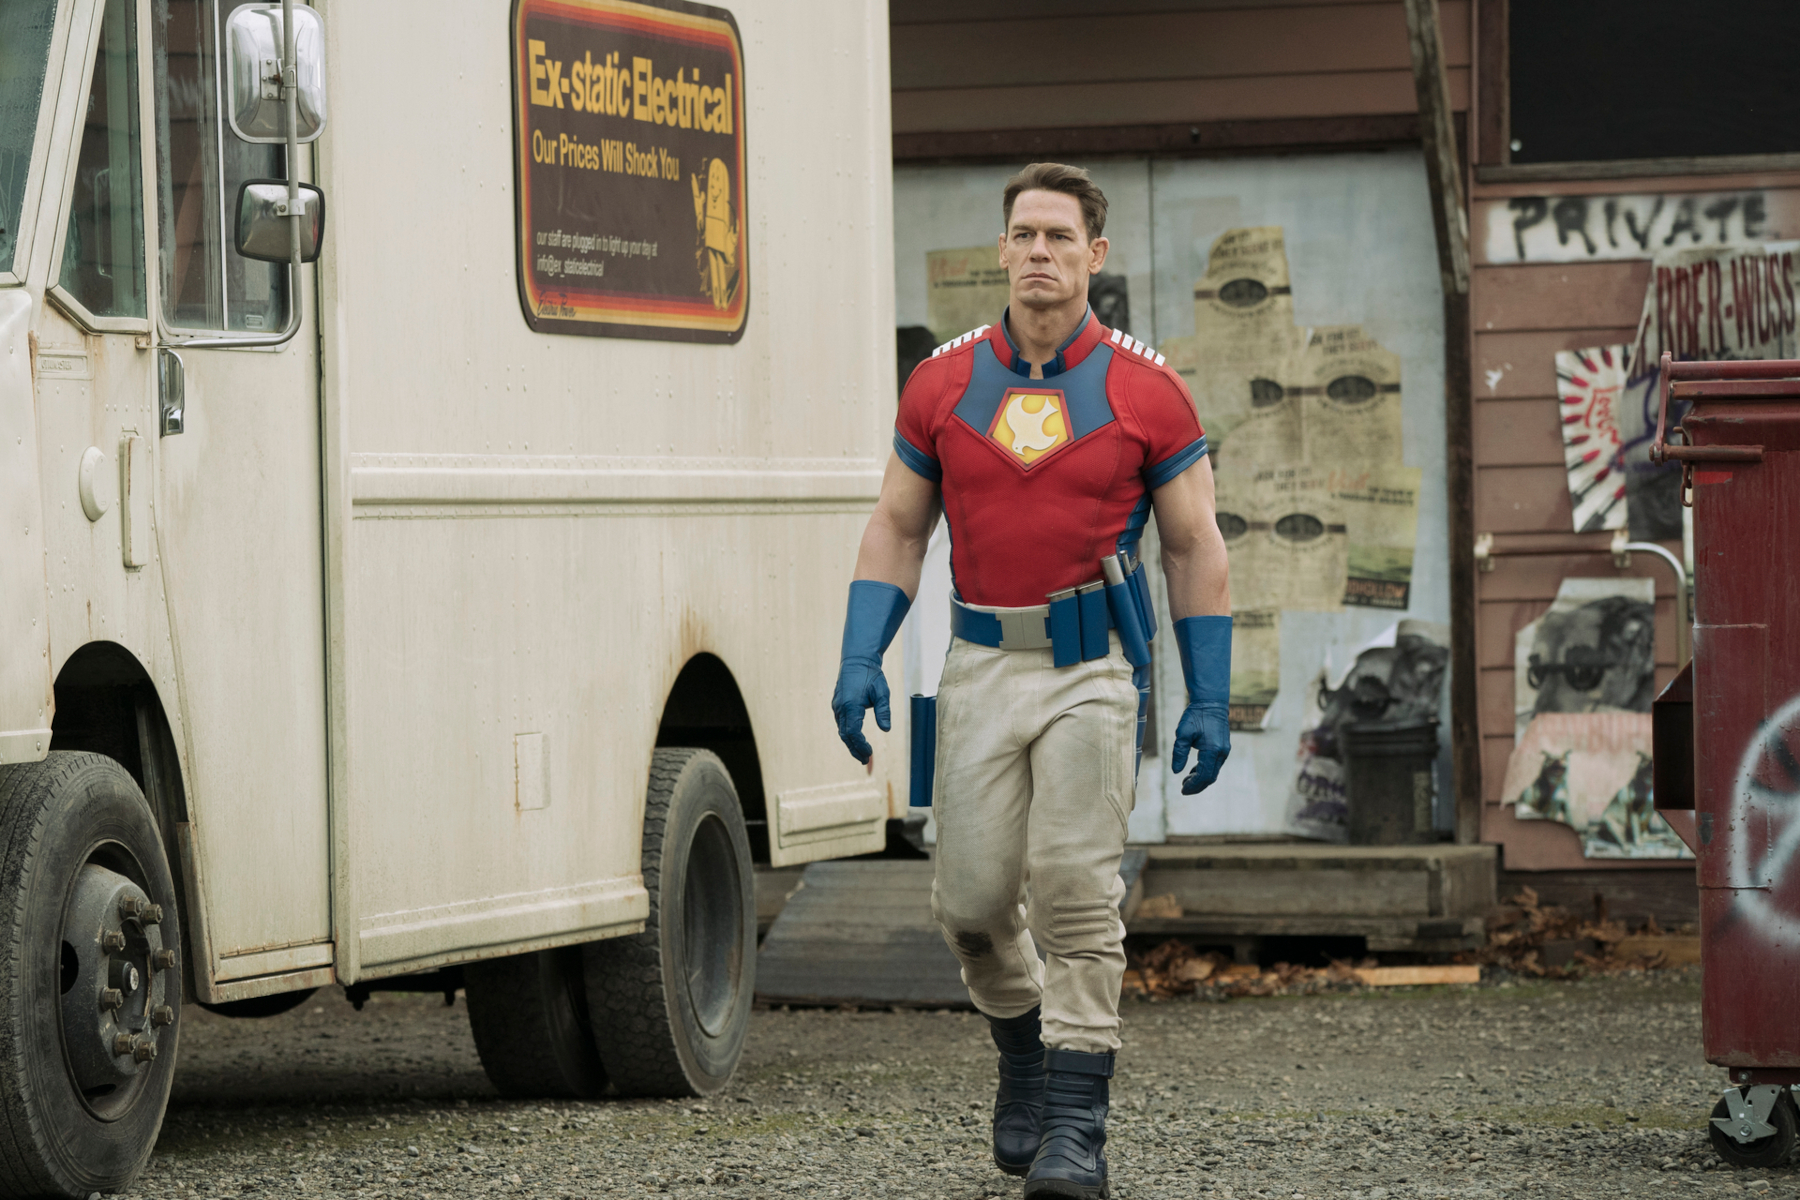 John Cena in 'Peacemaker' for our list of best superhero shows of 2022. He's wearing a red, blue, and yellow shirt and walking alongside a truck.